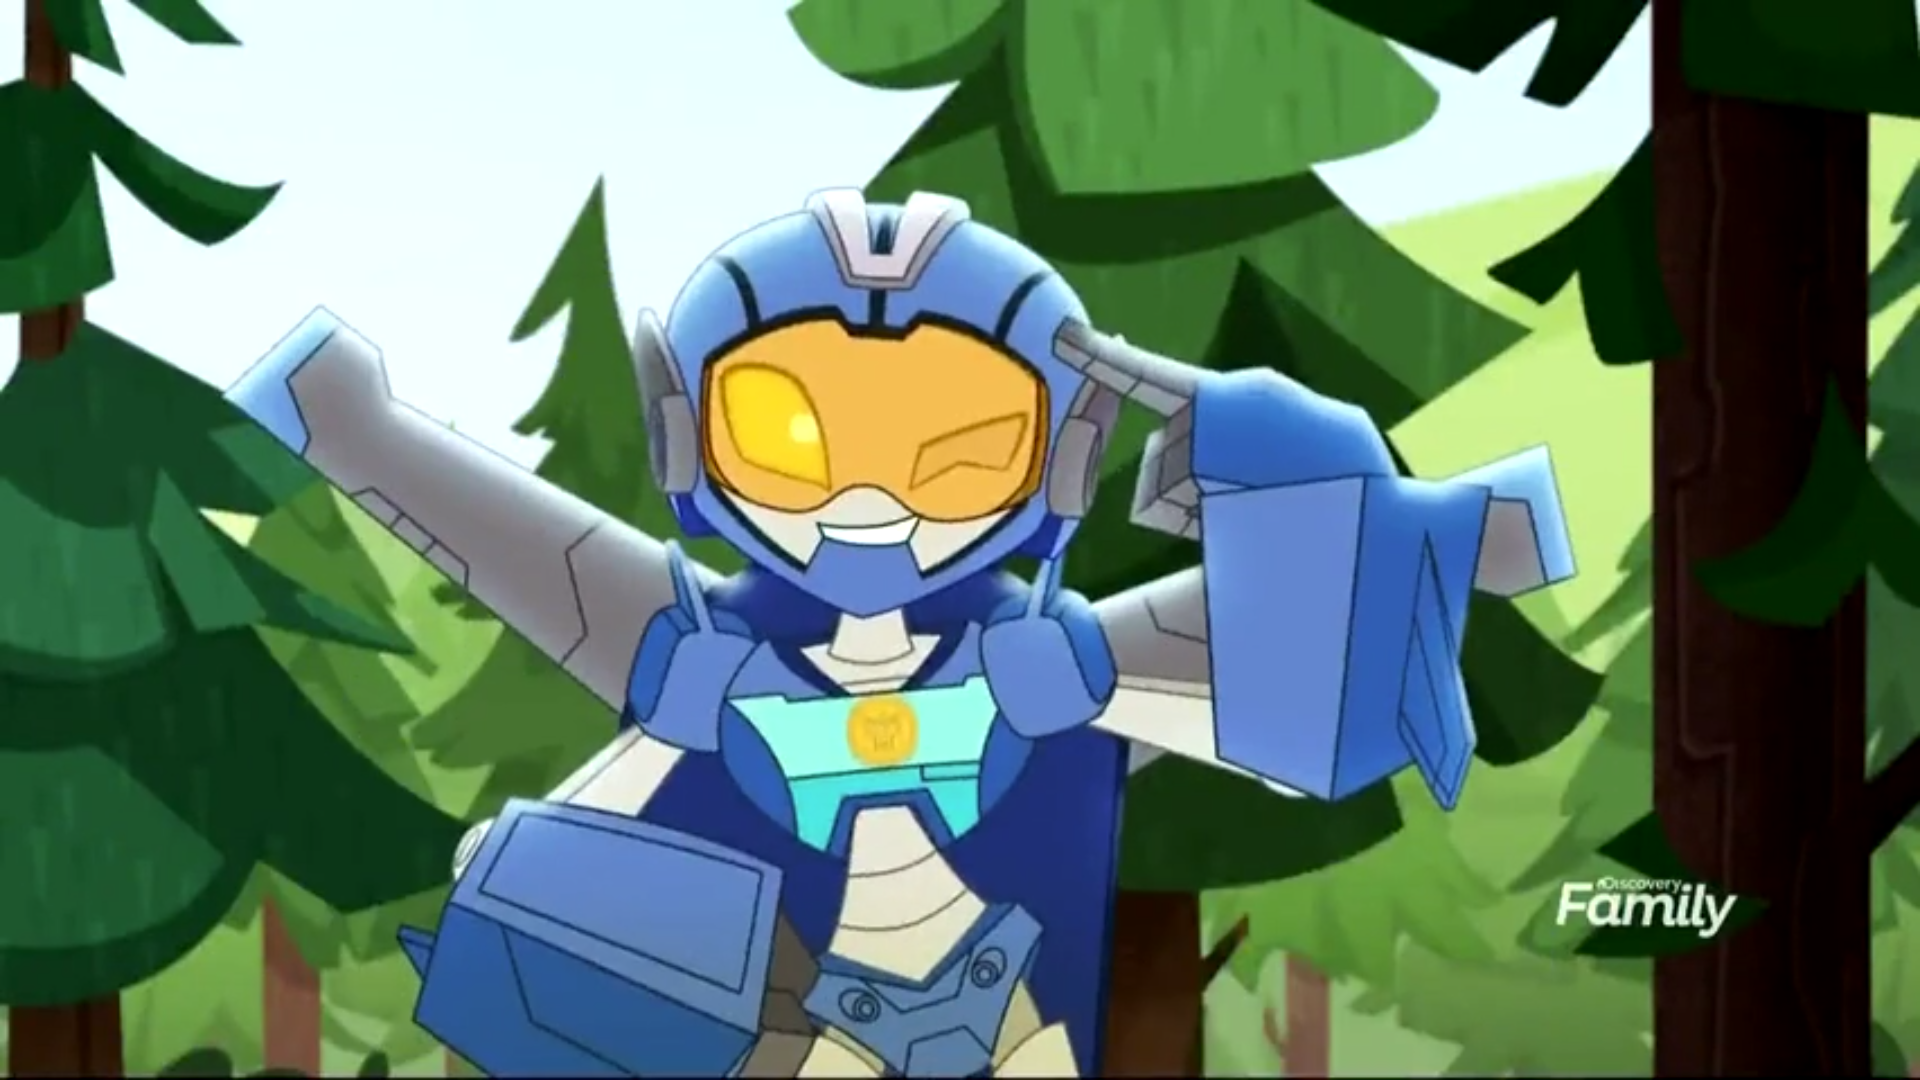 Whirl being adorable. Transformers rescue bots, Rescue bots, Transformers comic